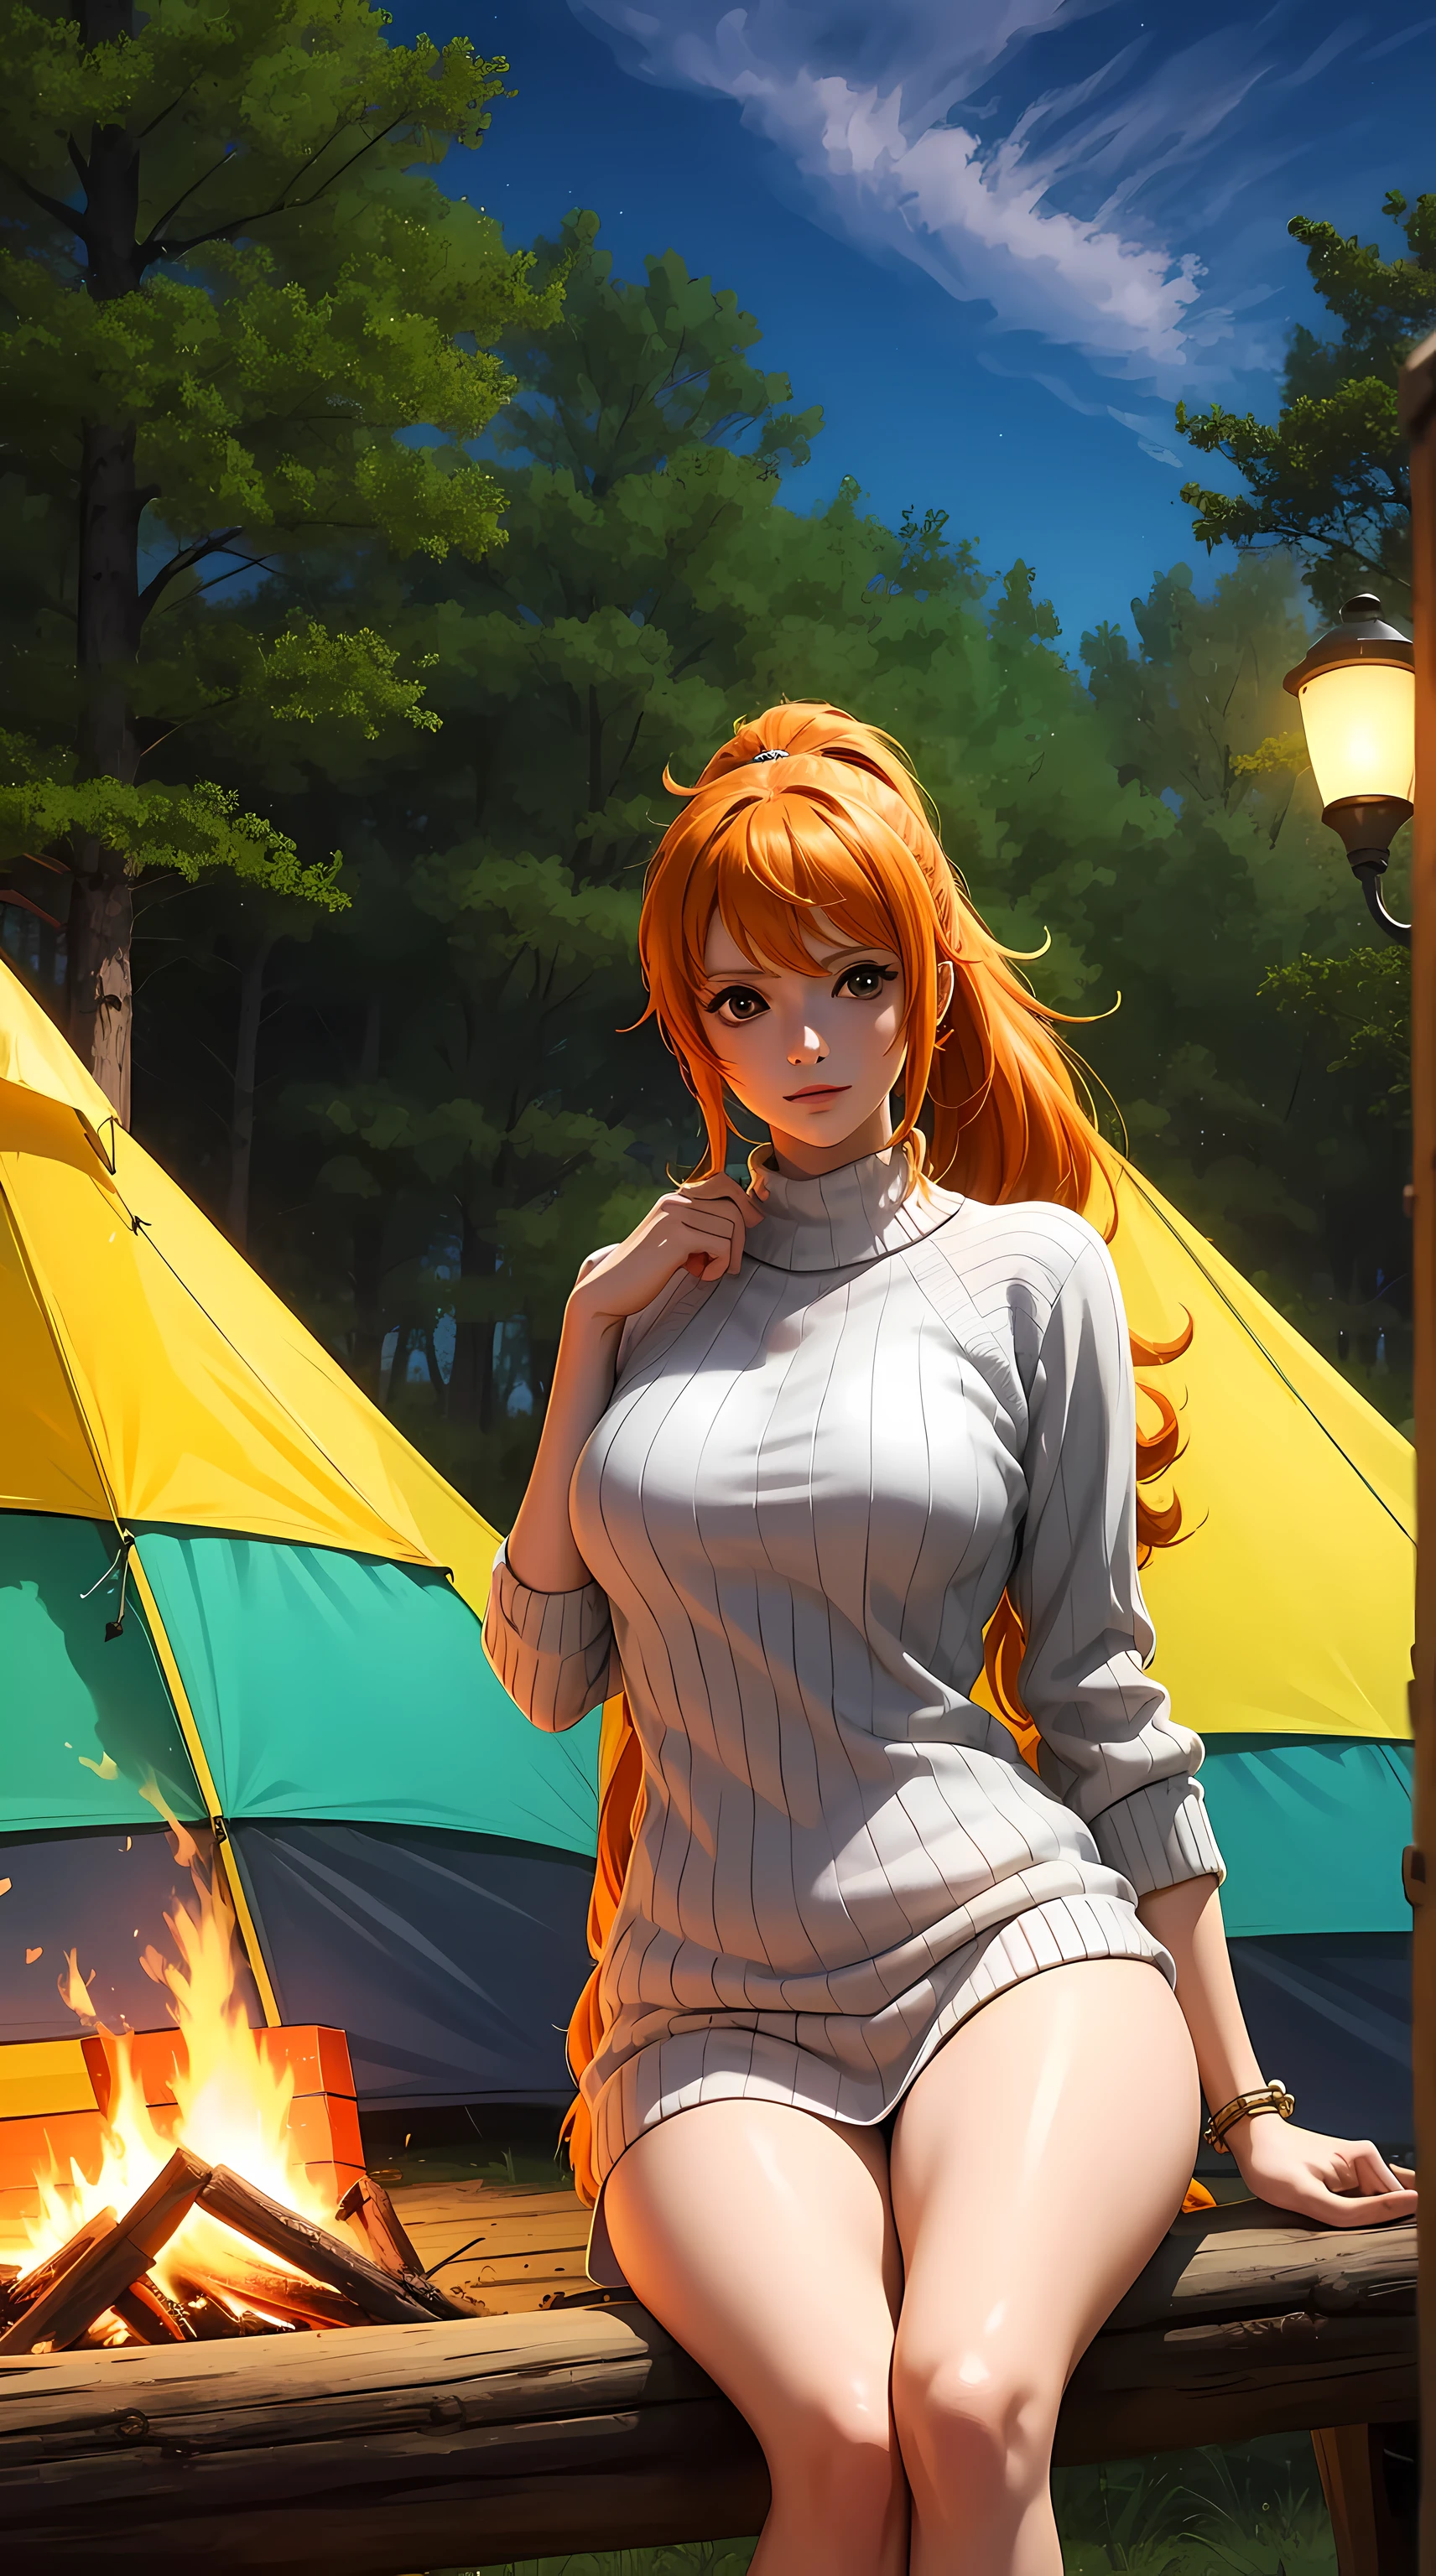 NamiFinal, nami from the anime one piece, long hair, orange hair, bangs, ponytail, ponytail, sitting on a log, beautiful, beautiful woman, perfect body, perfect breasts, wearing a sweater, in the forest, camping, tent camp, trees, night, nighttime, campfire, looking at viewer, slight smile, realism, masterpiece, textured skin, super detail, high detail, high quality, best quality, 1080p, 16k